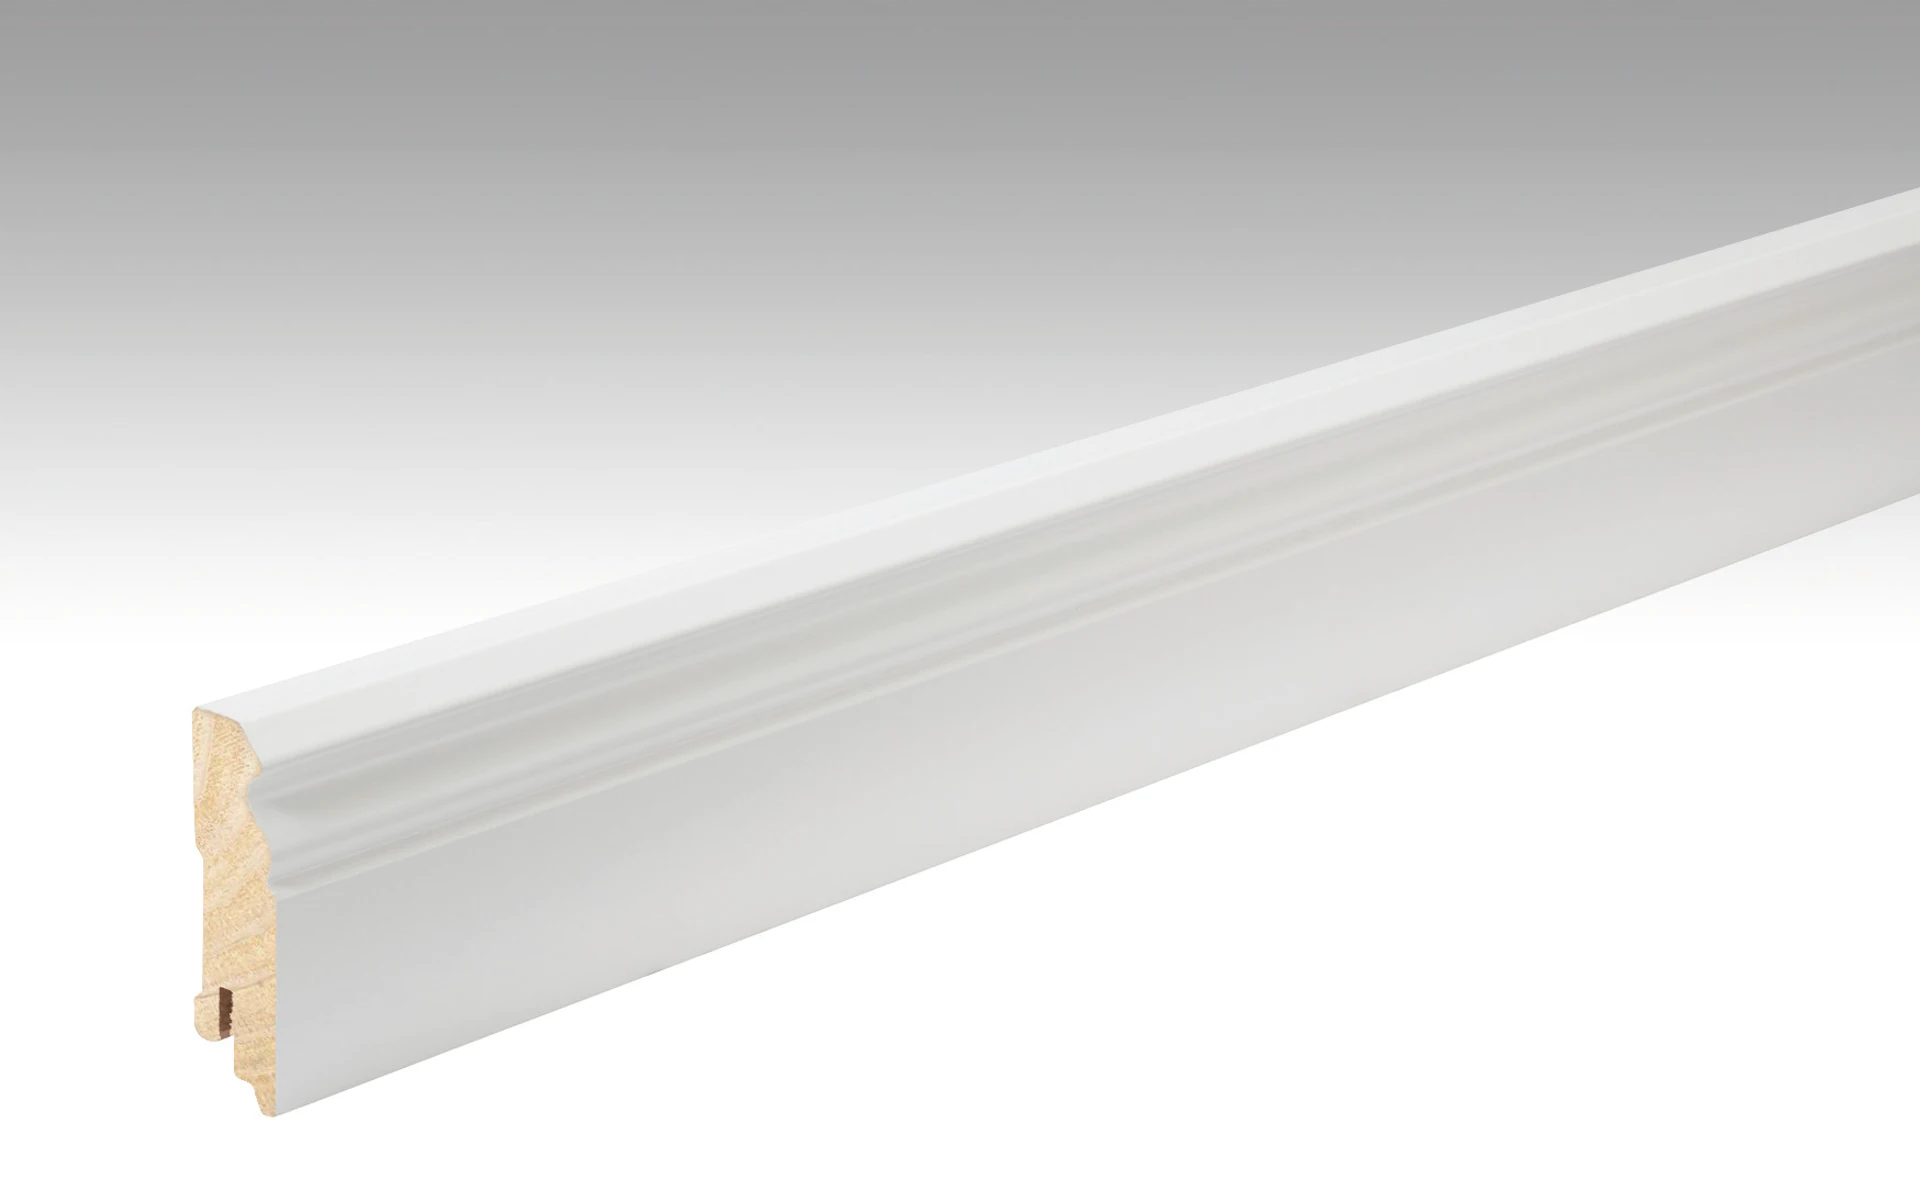 MEISTER Skirtings White DF (RAL 9016) 2266 - 2380 x 60 x 18 mm (200019-2380-02266)